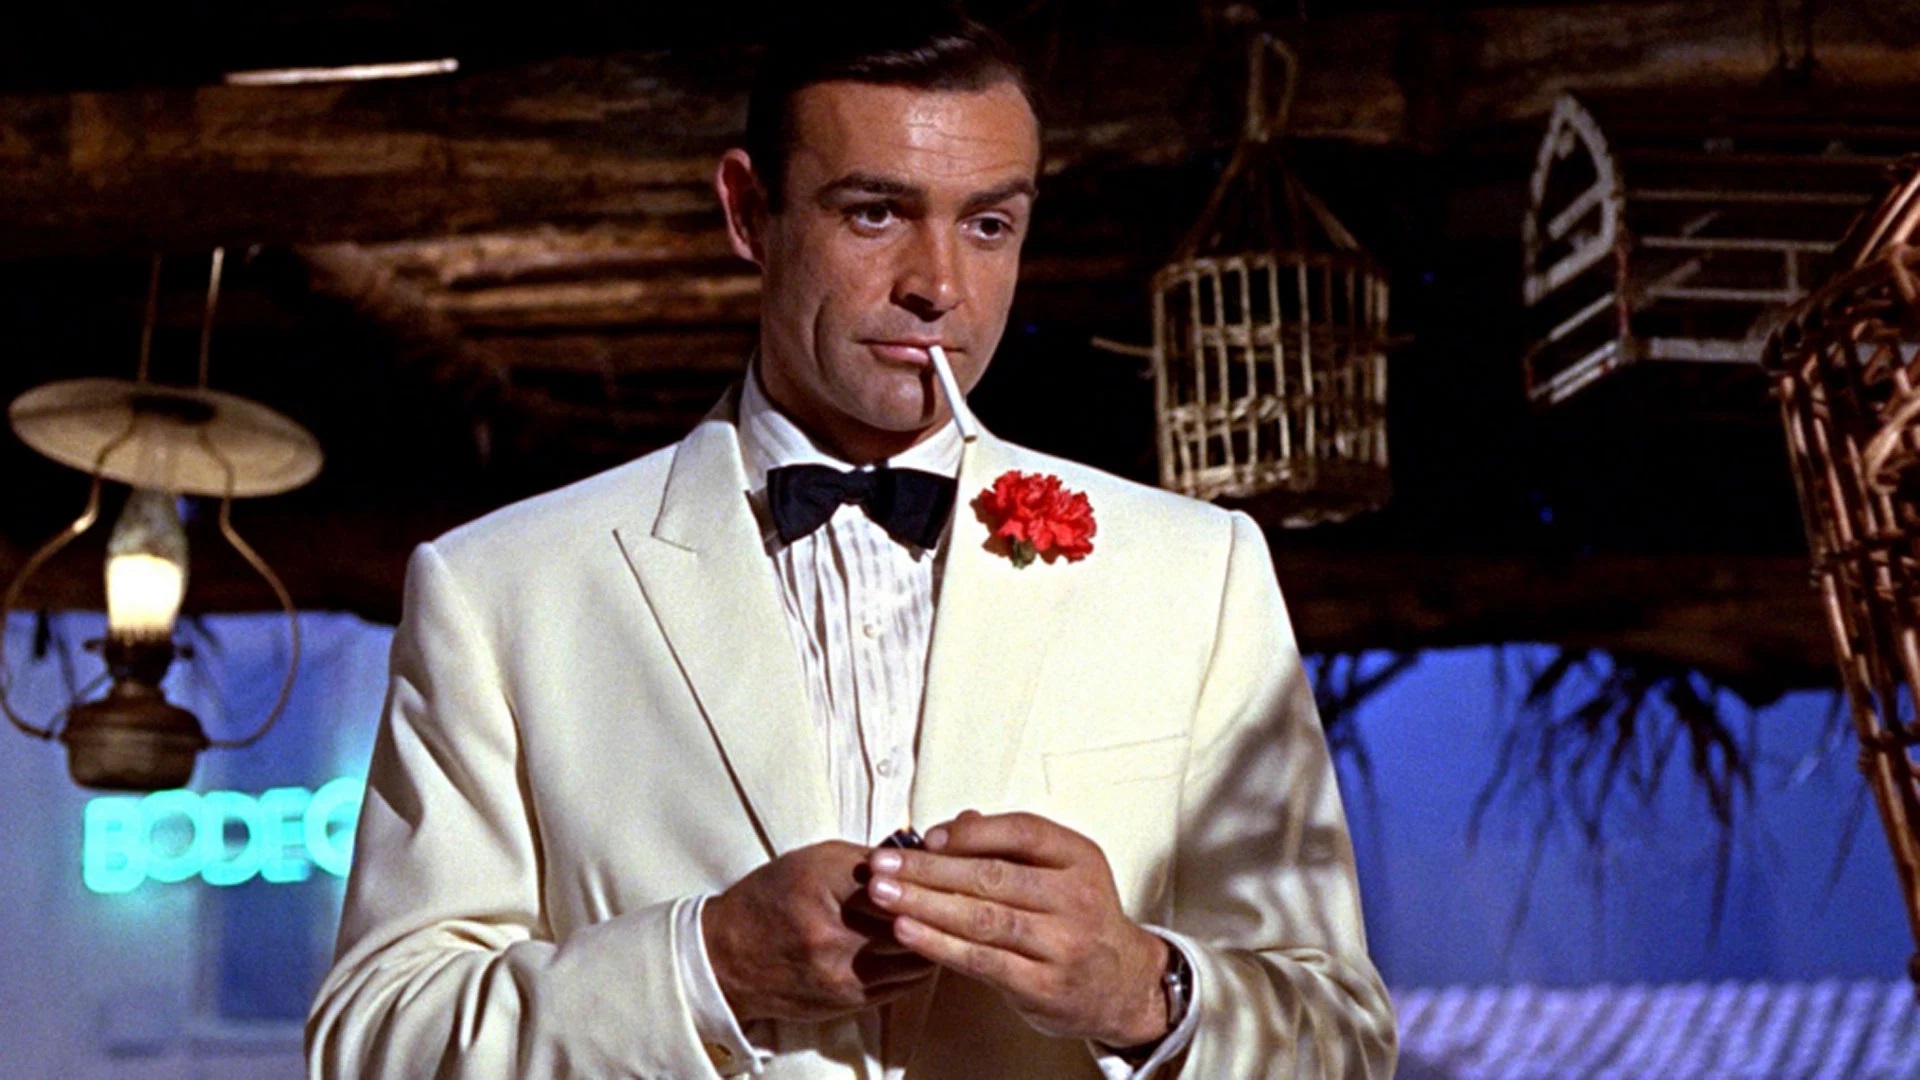 James Bond Producers, Daniel Craig, Hugh Jackman, and More Pay Tribute to Sean Connery - Den of Geek